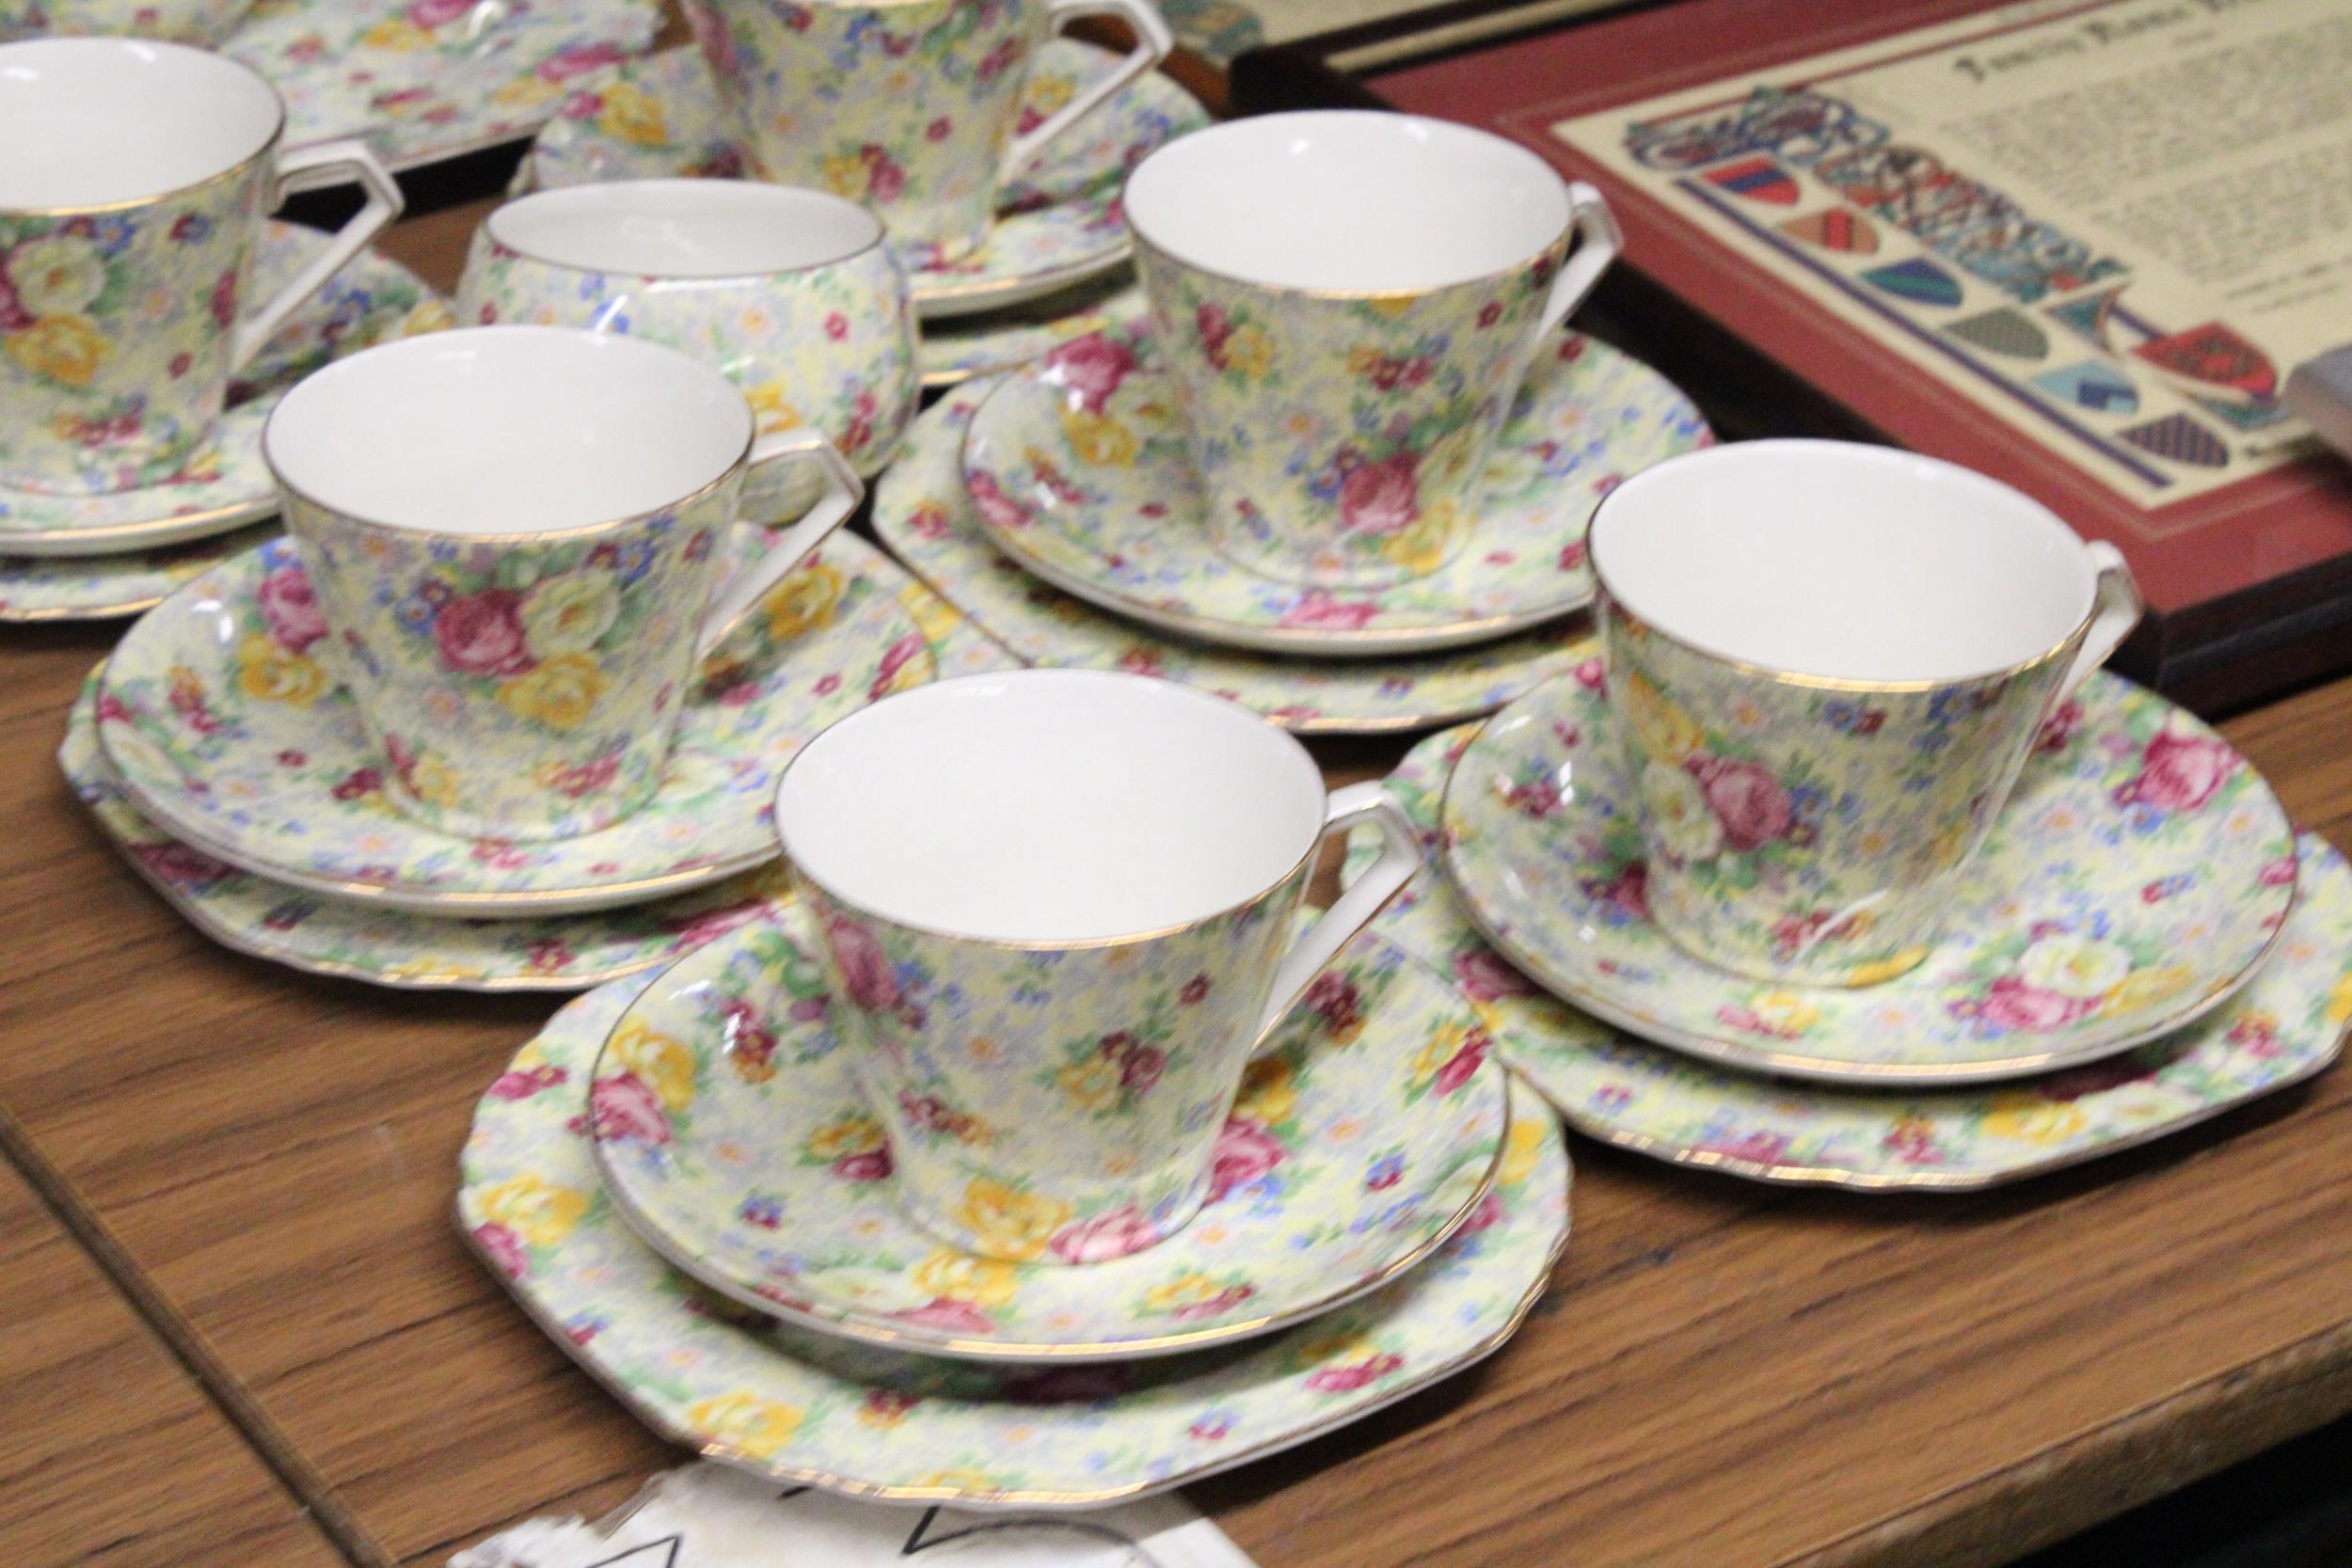 A LORD NELSON CHINTZ TEASET TO INCLUDE A CAKE PLATE, CREAM JUG, SUGAR BOWL, CUPS, SAUCERS AND SIDE - Image 2 of 5